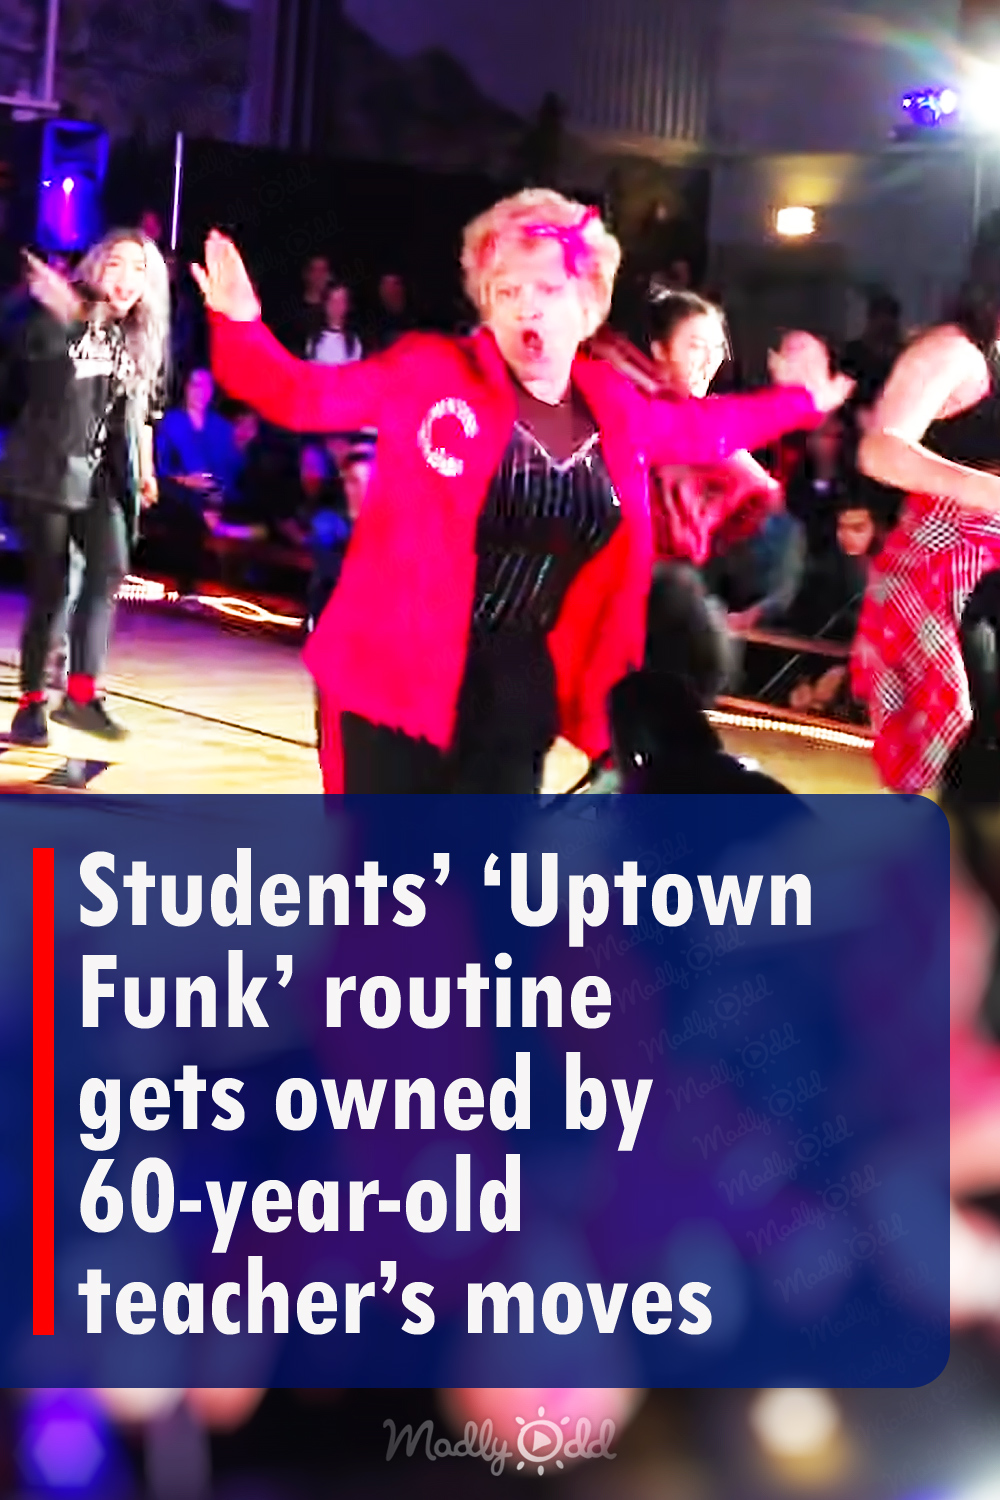 Students’ ‘Uptown Funk’ routine gets owned by 60-year-old teacher’s moves